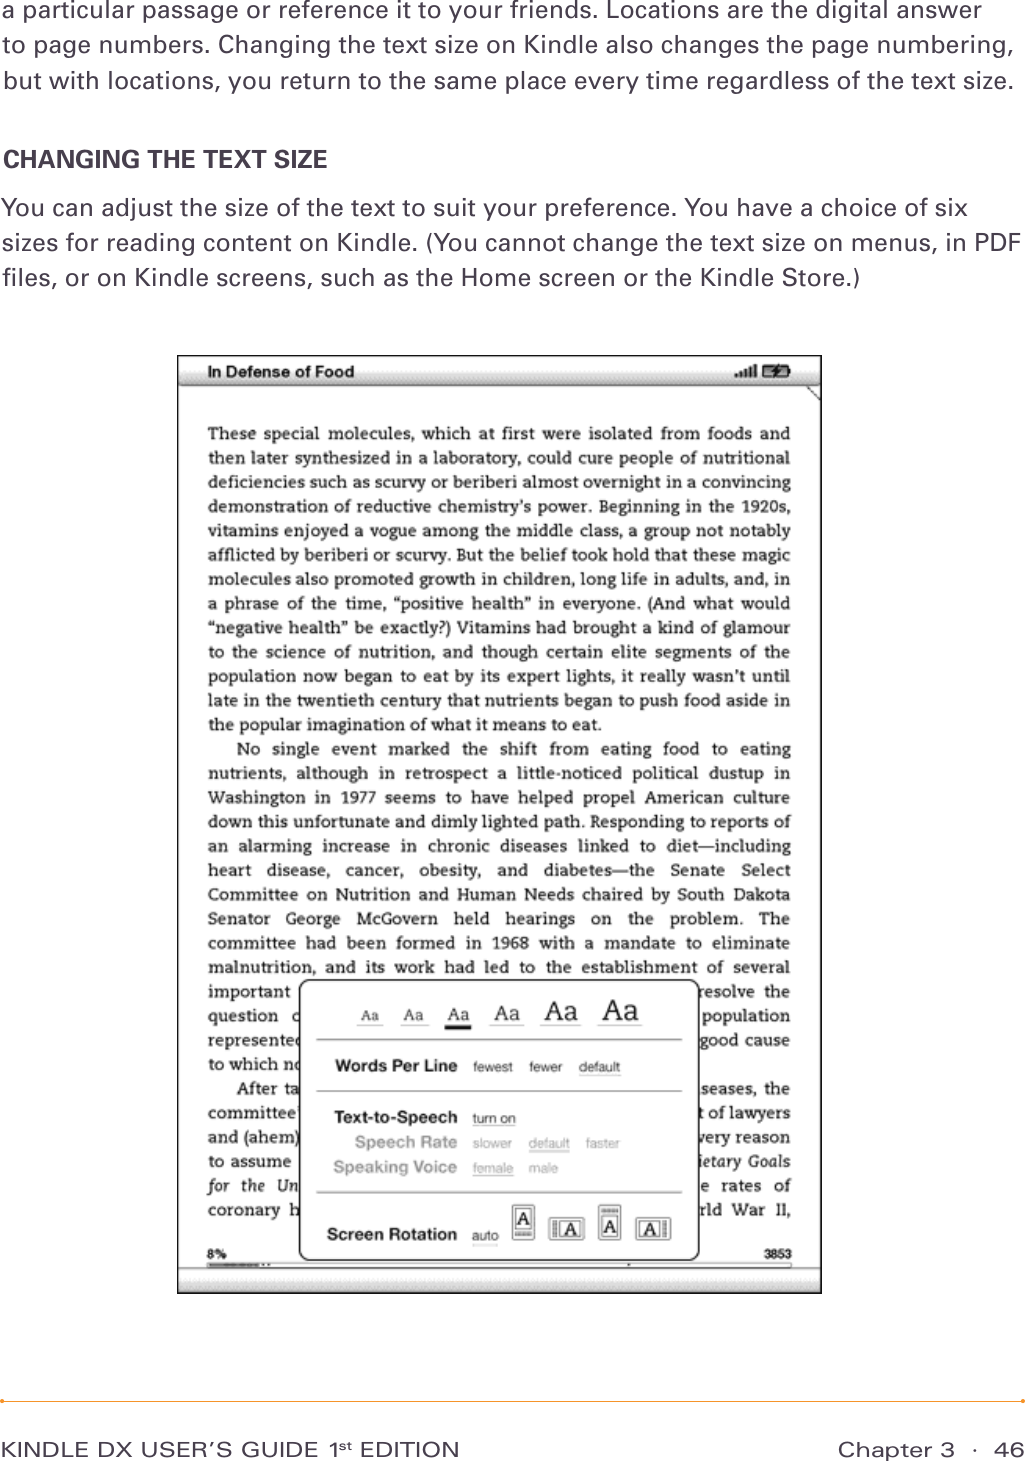 KINDLE DX USER’S GUIDE 1st EDITION Chapter 3  ·  46a particular passage or reference it to your friends. Locations are the digital answer to page numbers. Changing the text size on Kindle also changes the page numbering, but with locations, you return to the same place every time regardless of the text size.CHANGING THE TEXT SIZEYou can adjust the size of the text to suit your preference. You have a choice of six sizes for reading content on Kindle. (You cannot change the text size on menus, in PDF ﬁles, or on Kindle screens, such as the Home screen or the Kindle Store.) 